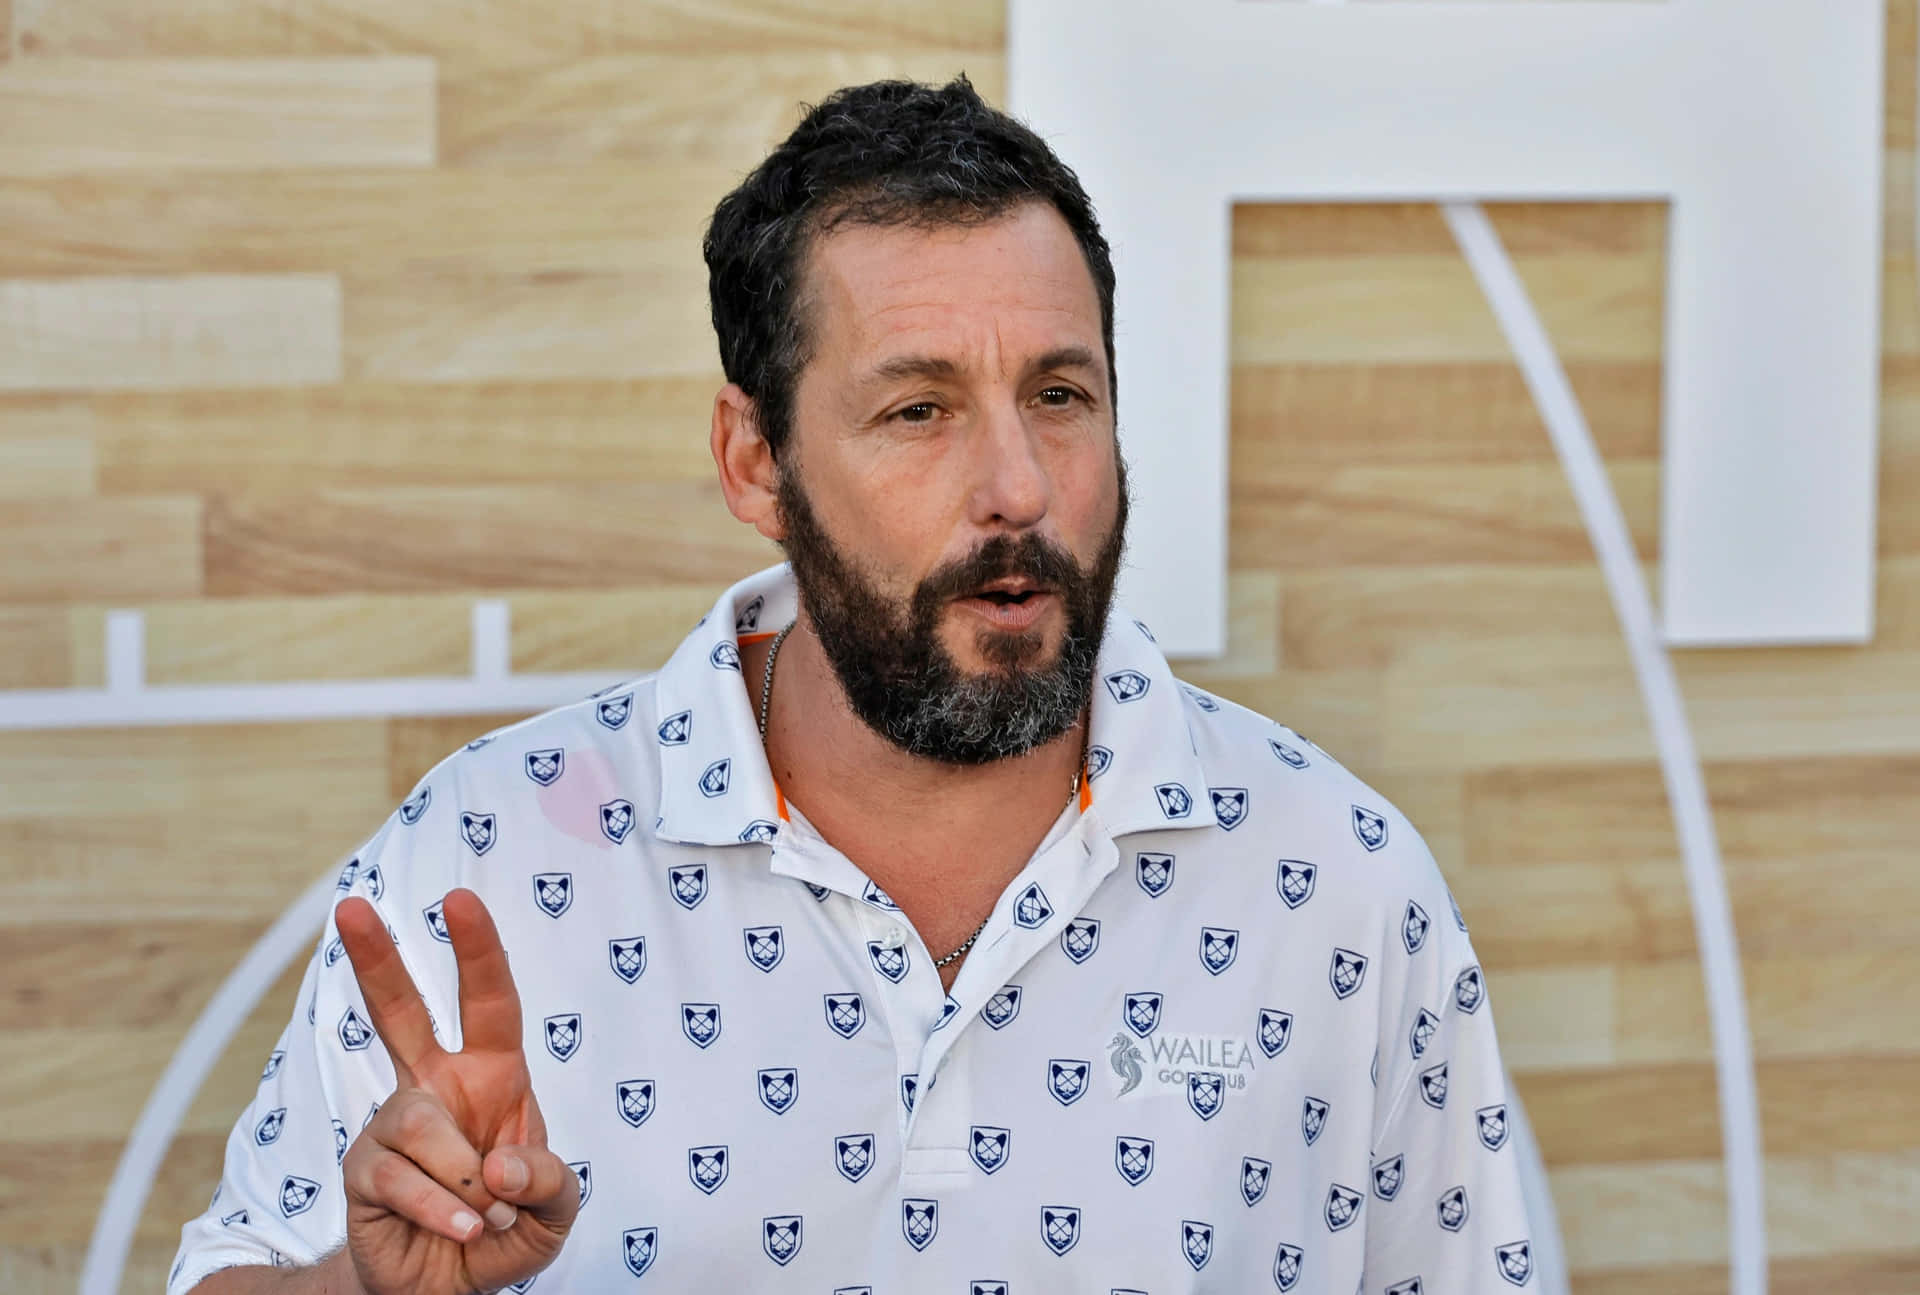 “Actor Adam Sandler Poses for a Picture”